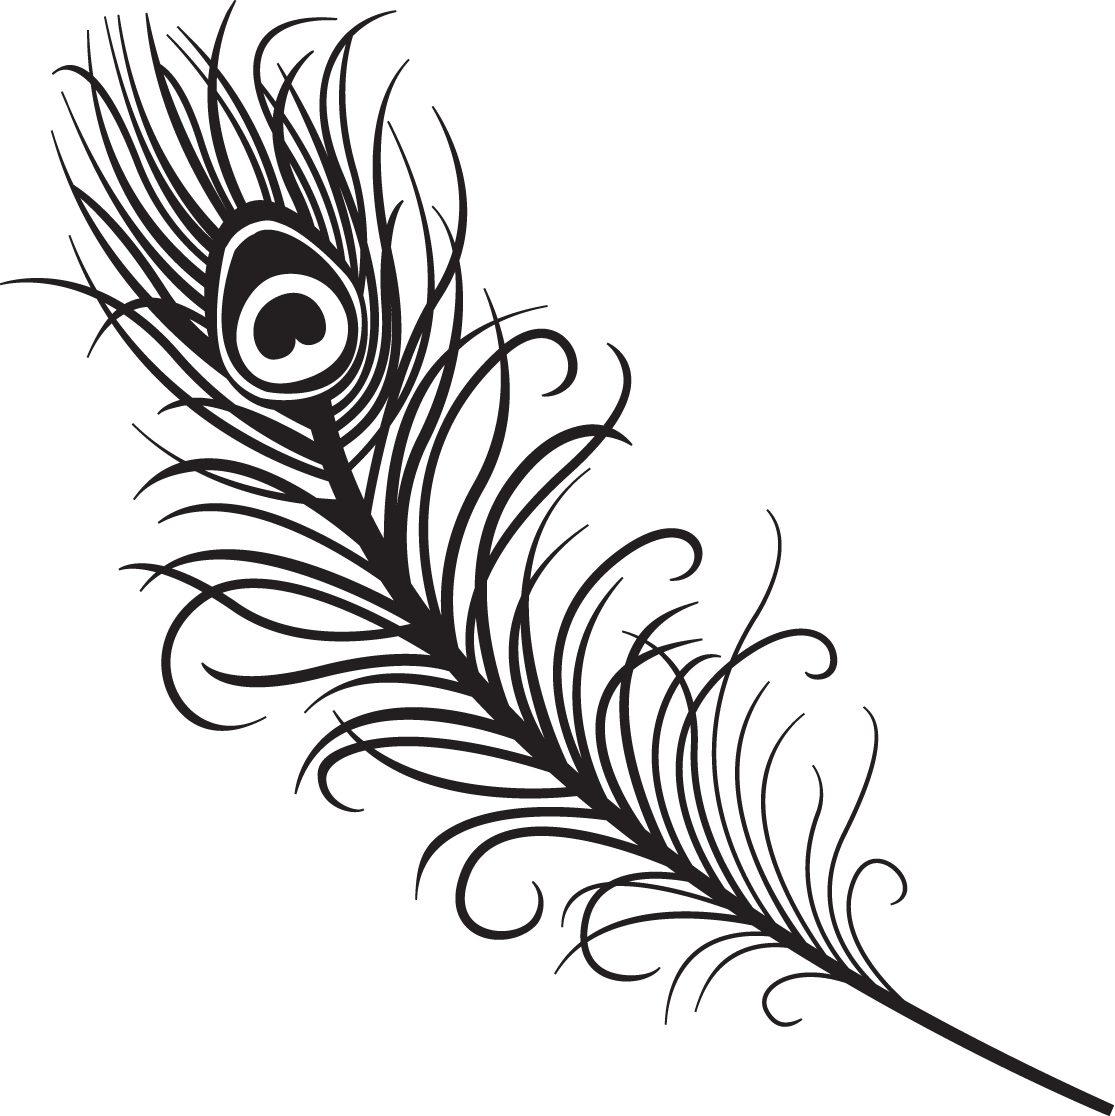 Peacock clipart clip art. Feather black and white